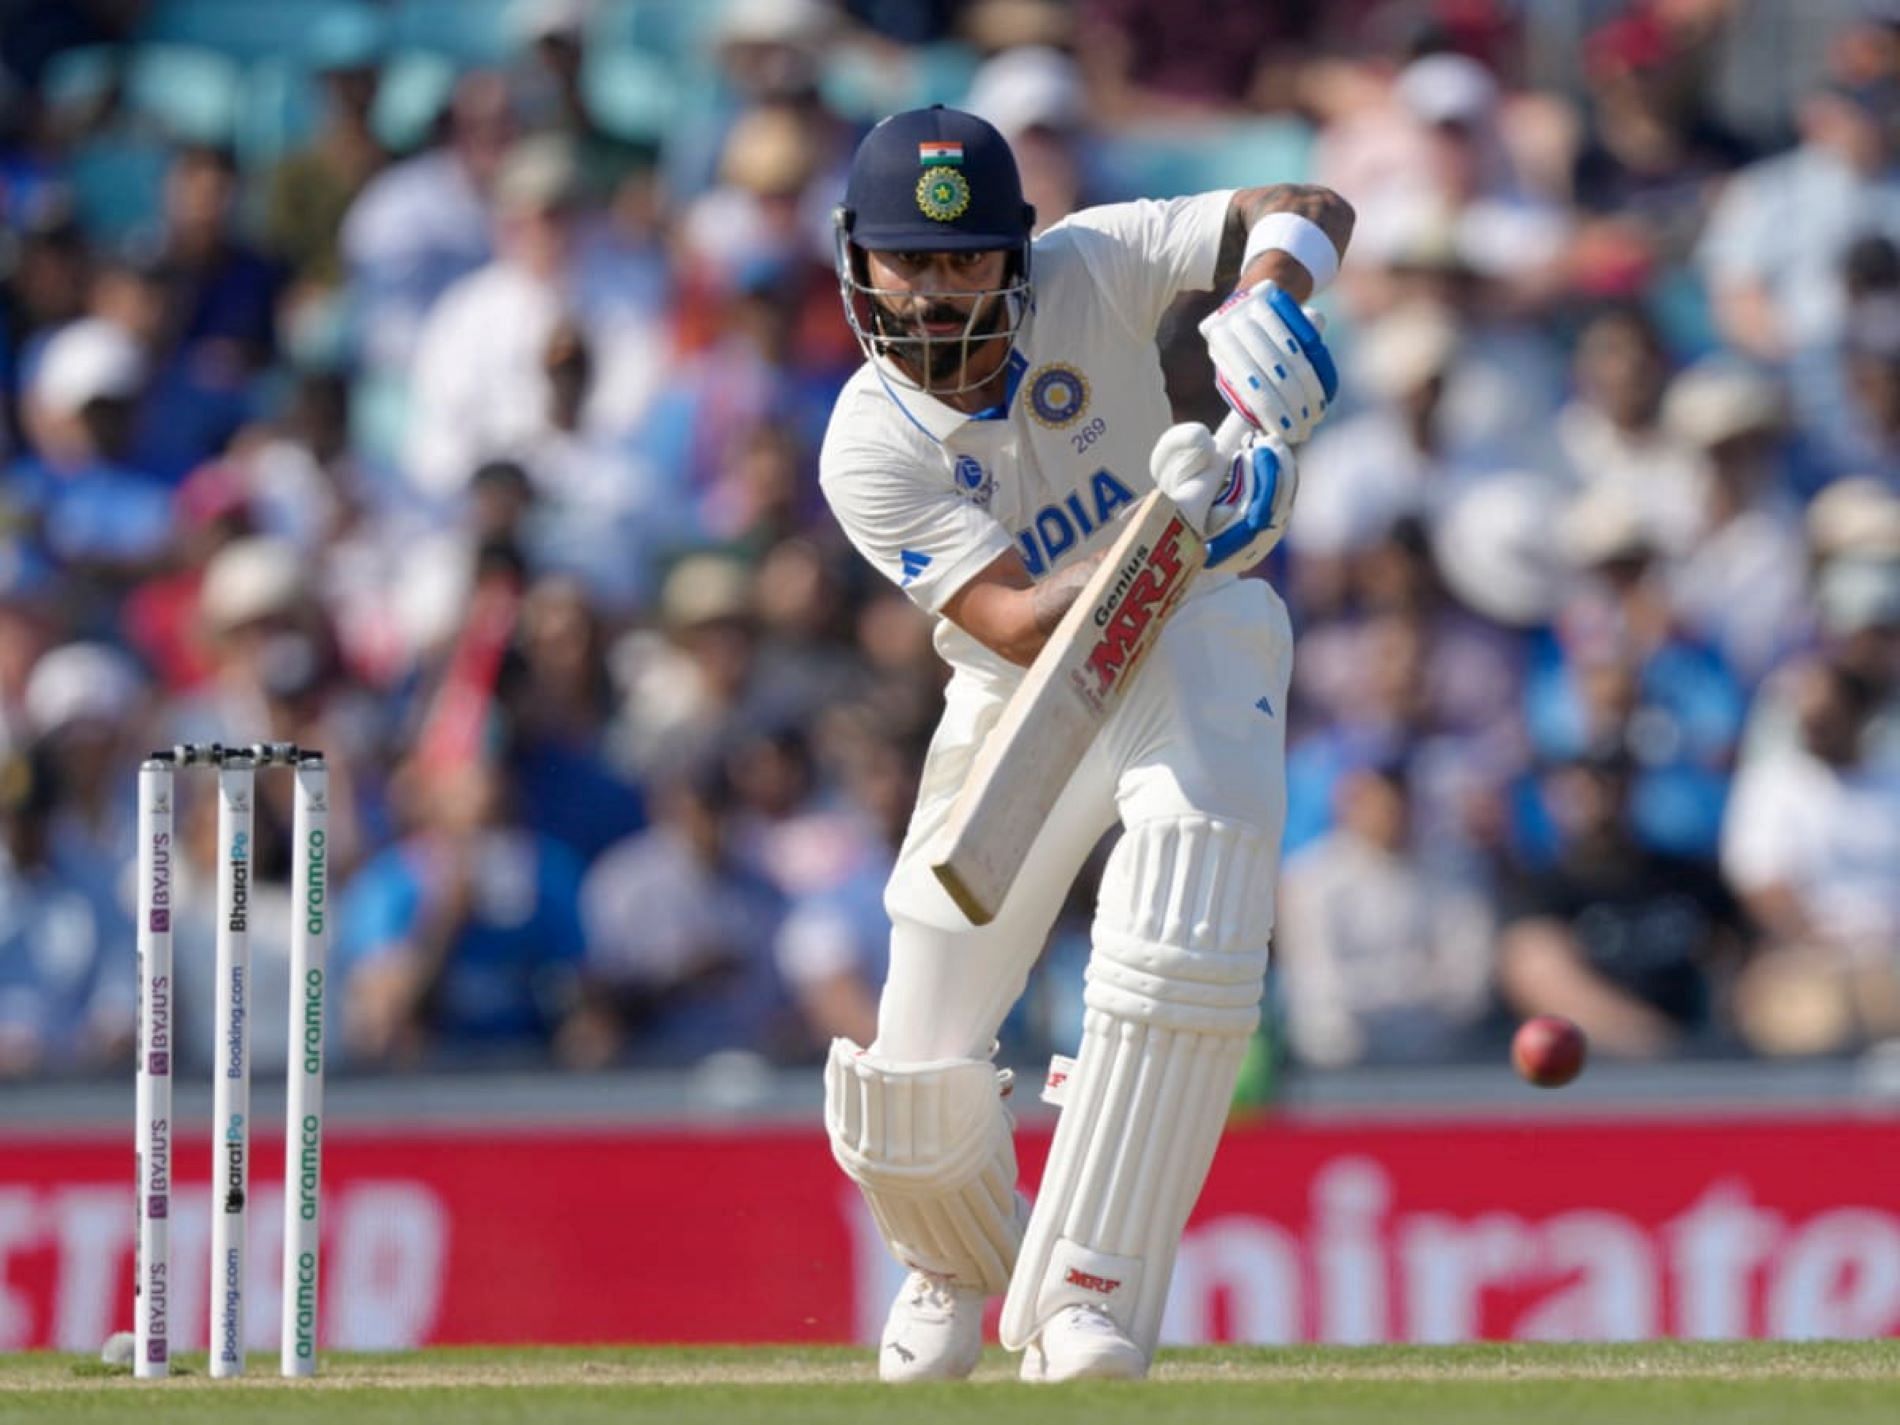 Virat Kohli will be key for India on day 5 of the WTC final